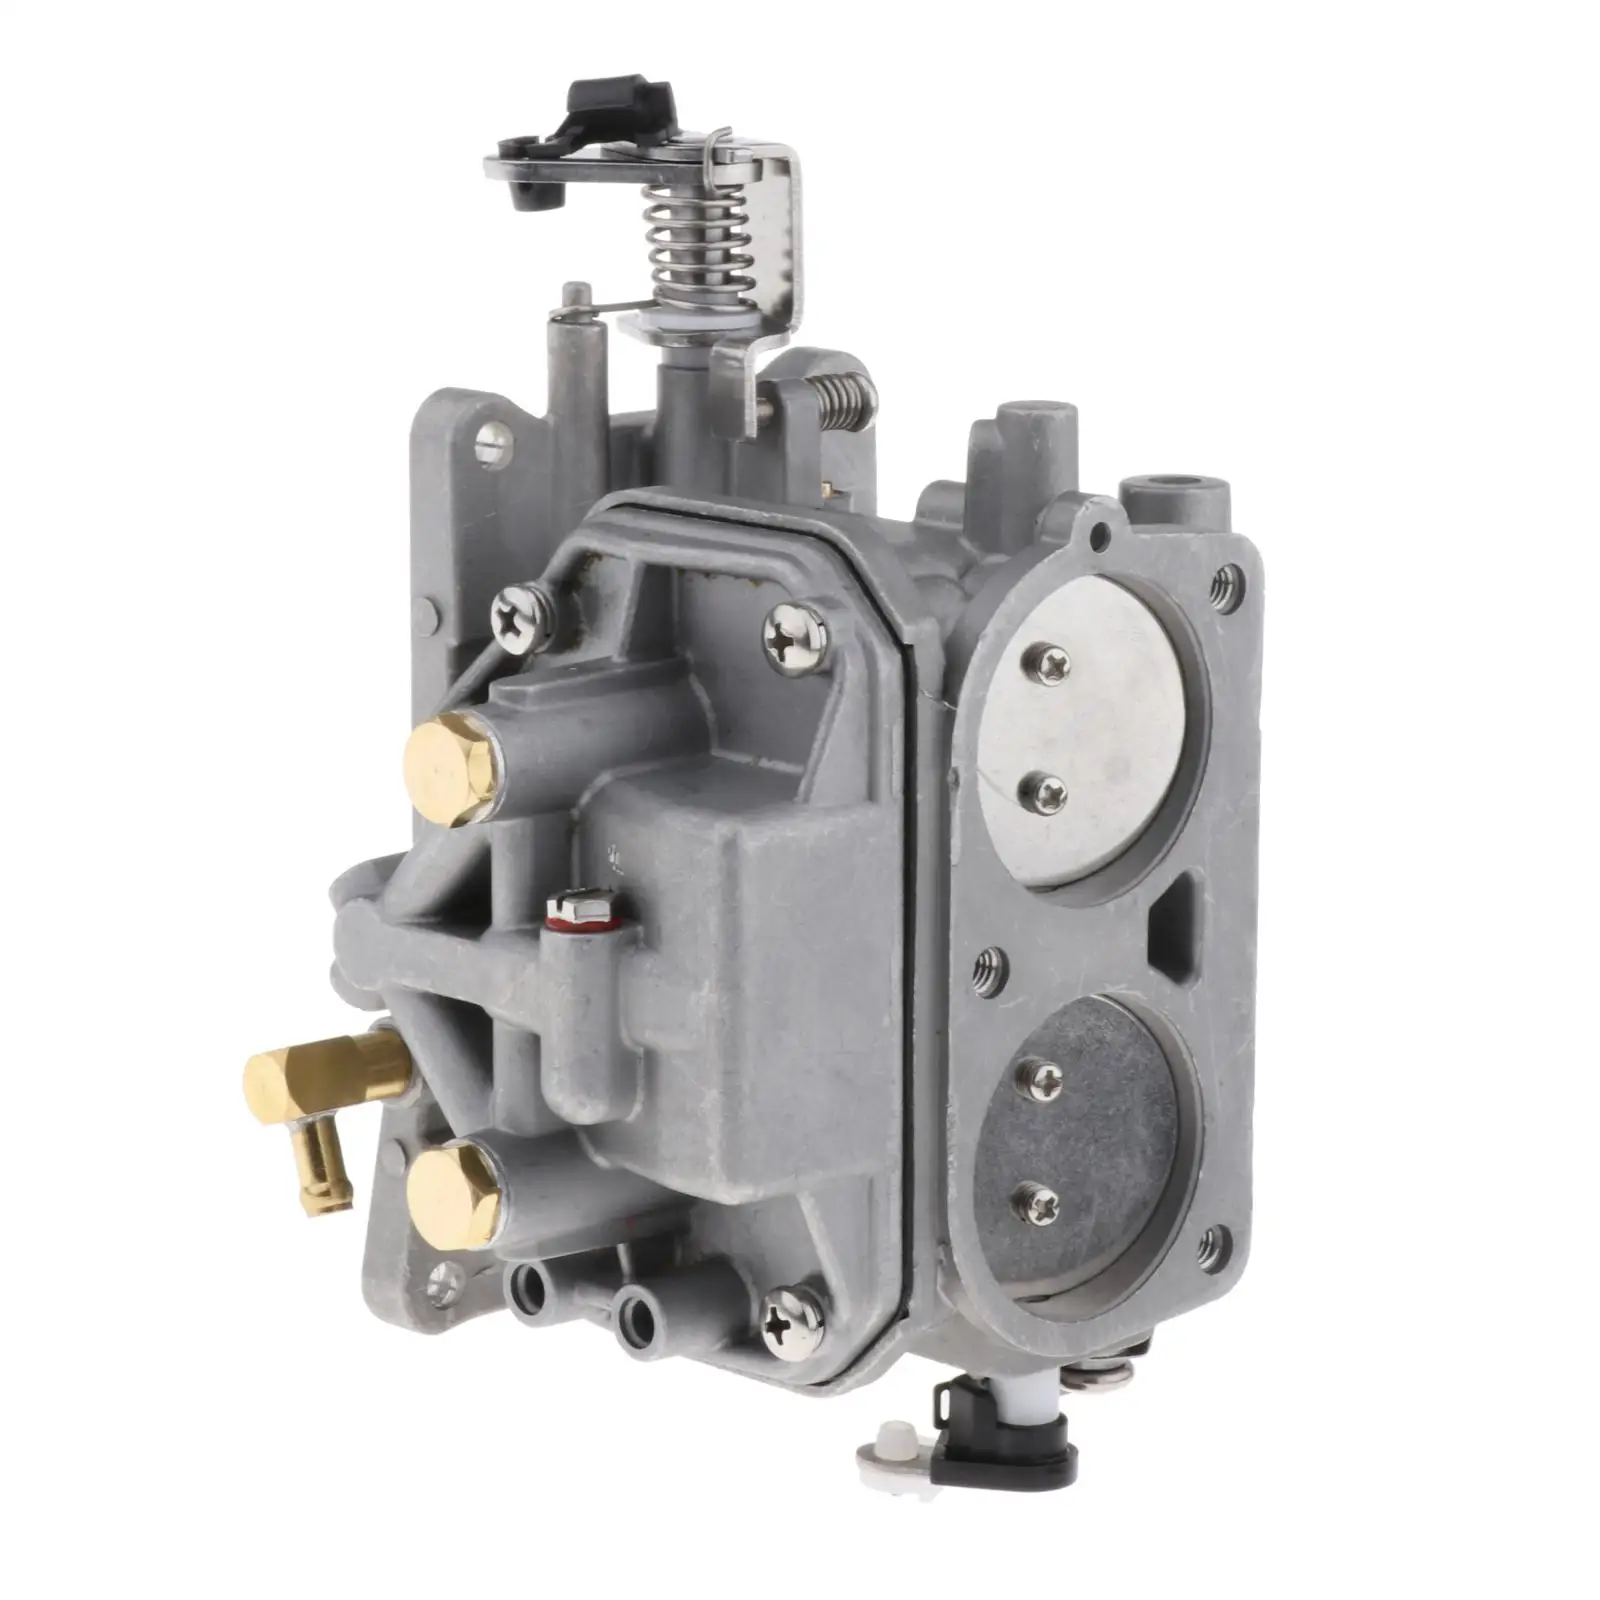 Carburetor Carburetor for  40HP J 1986 1993 for Chinese Parsun T36J T40J Outboard Motor Replace 6F6 14 301 00 6F5 14 301 00